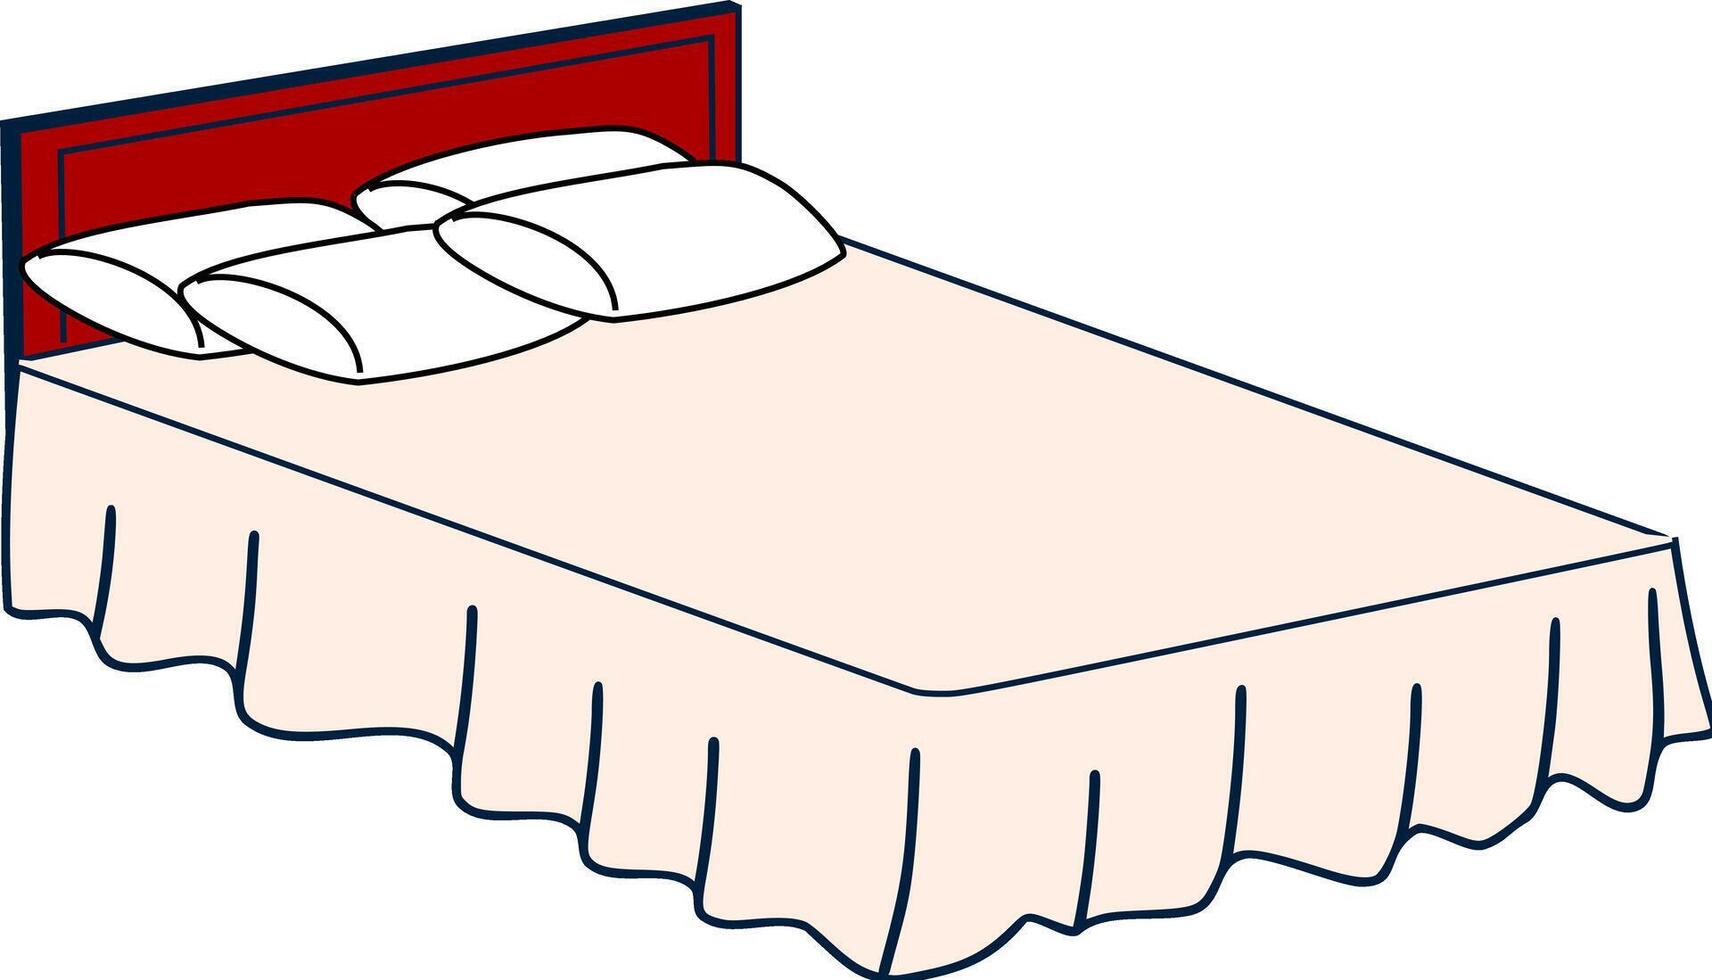 Sleep Essence - Clean Icon Depicting the Bed Concept. Bed icon illustration. vector